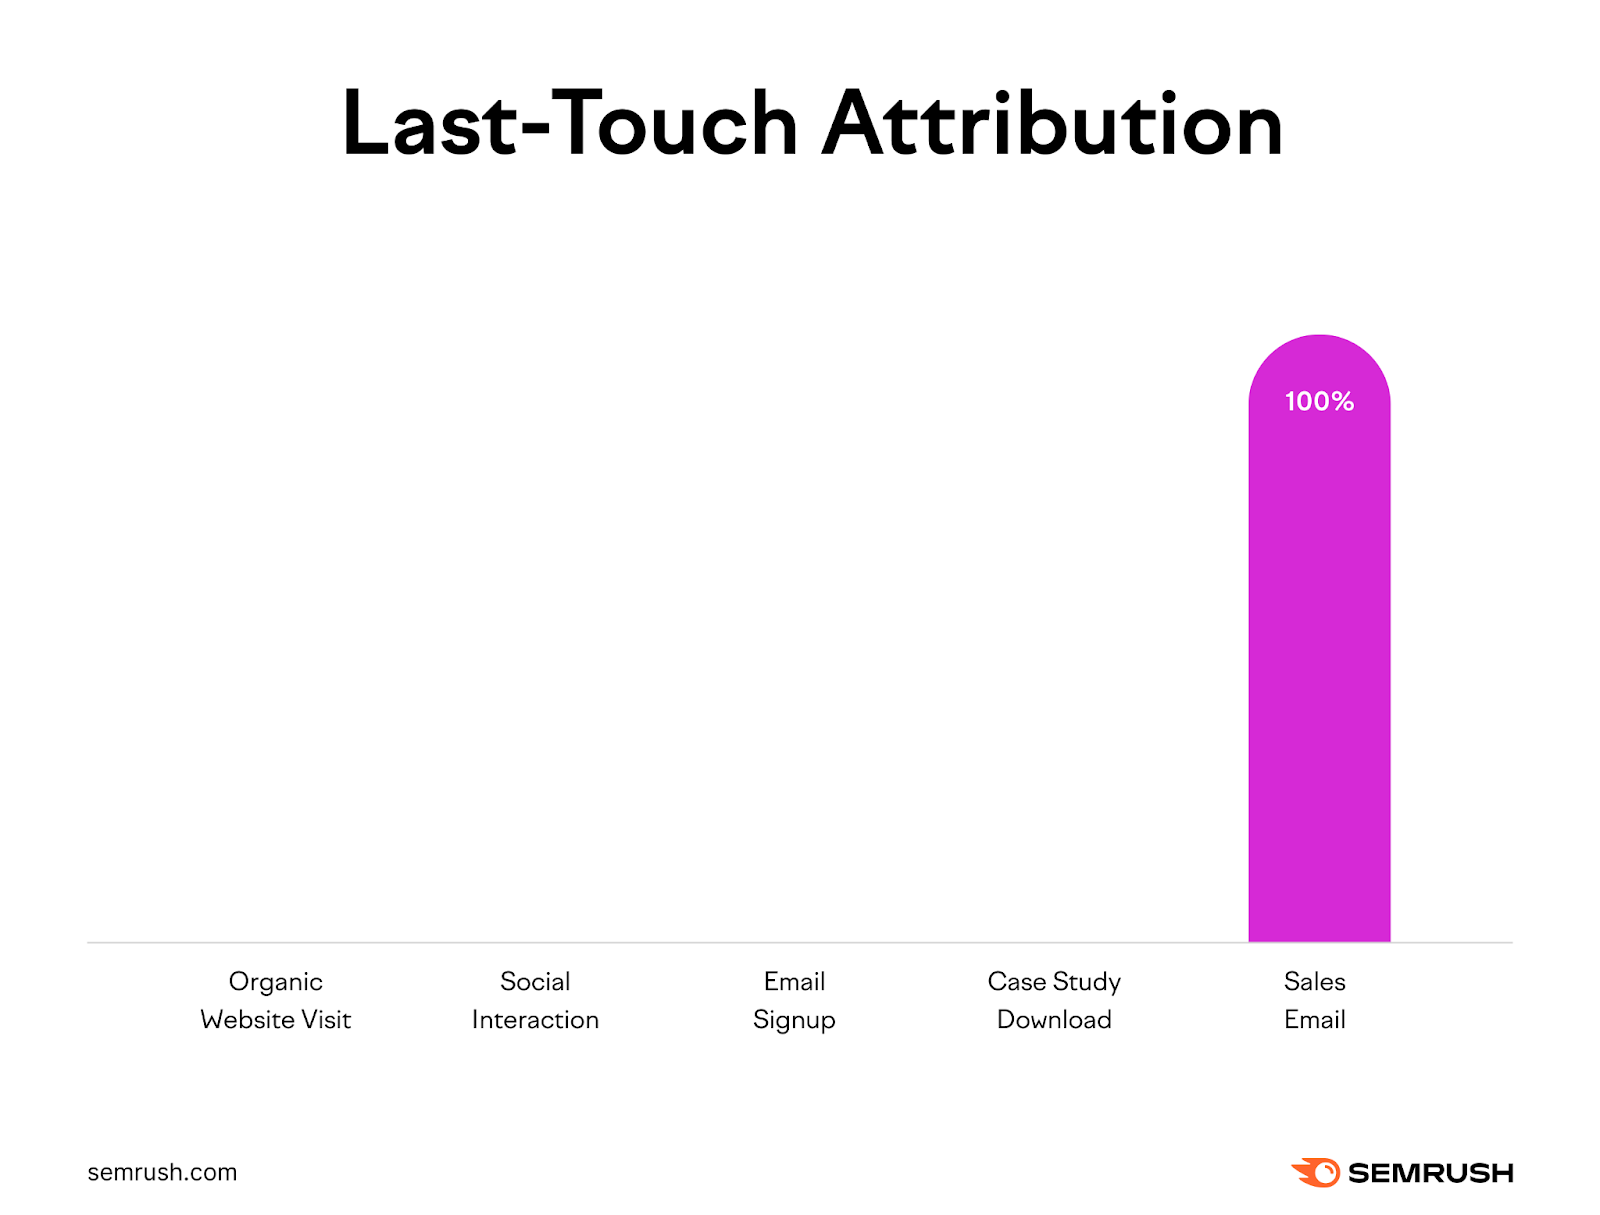 Last-touch attribution assigns each  recognition  to the past  touchpoint.